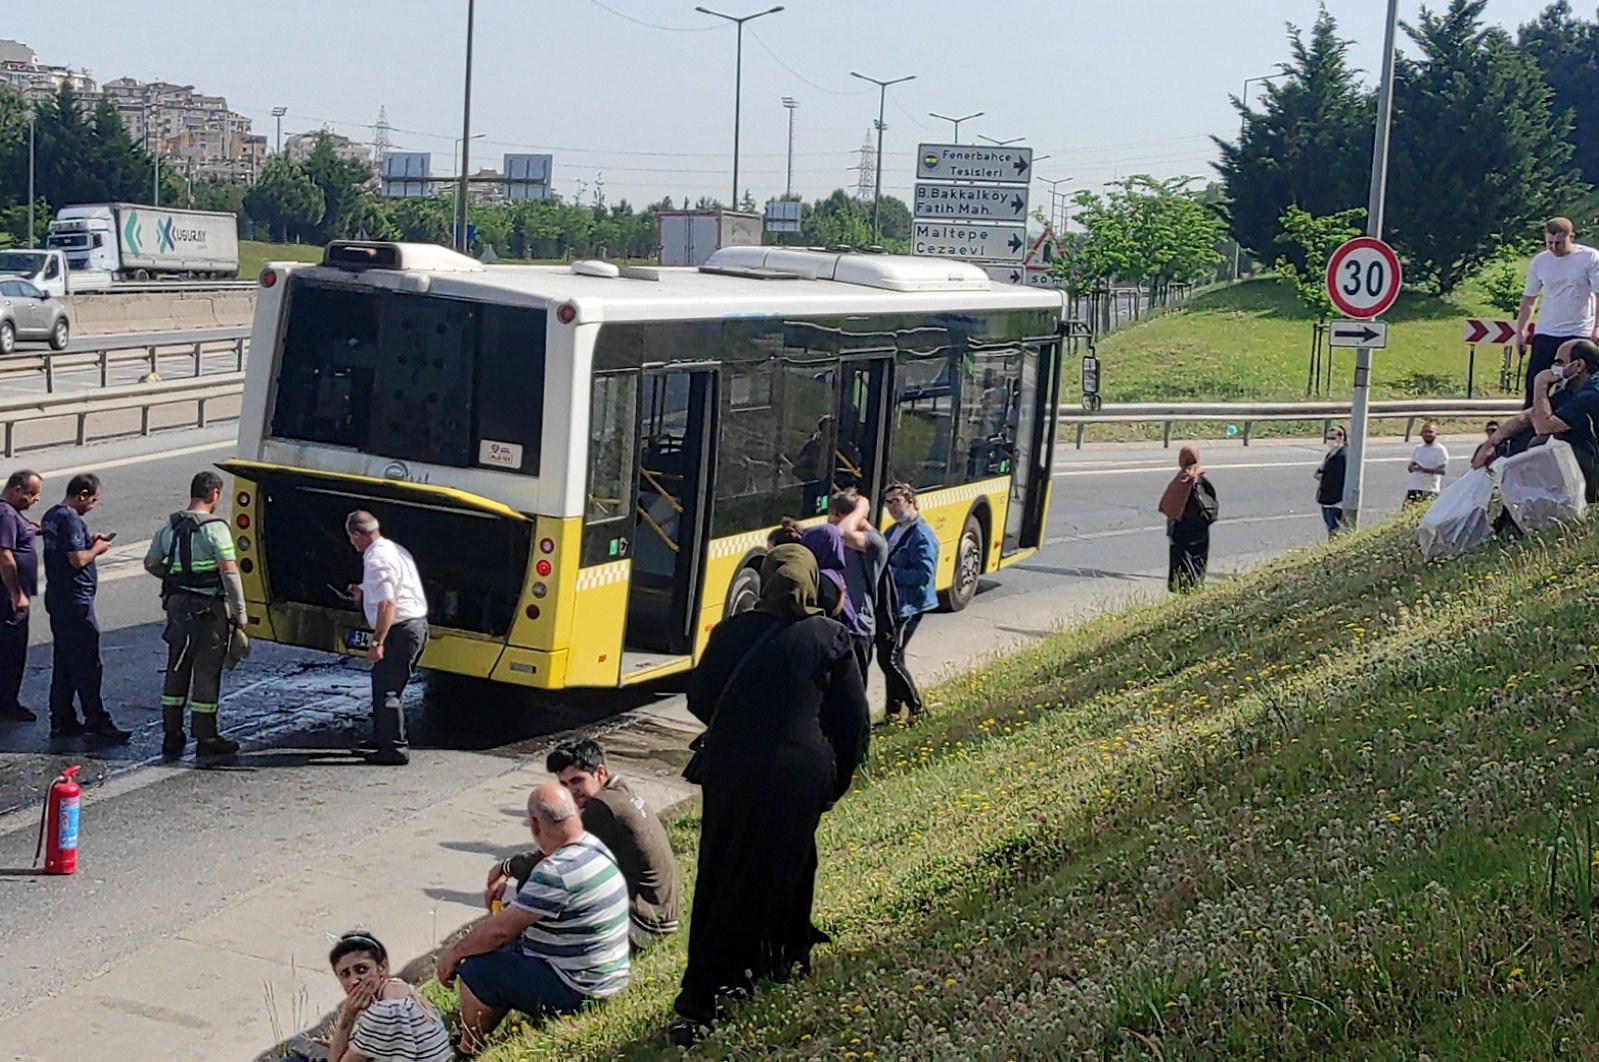 Passengers wait on the roadside after a bus broke down in the Kartal district, in Istanbul, Turkey, May 30, 2022. (AA PHOTO)